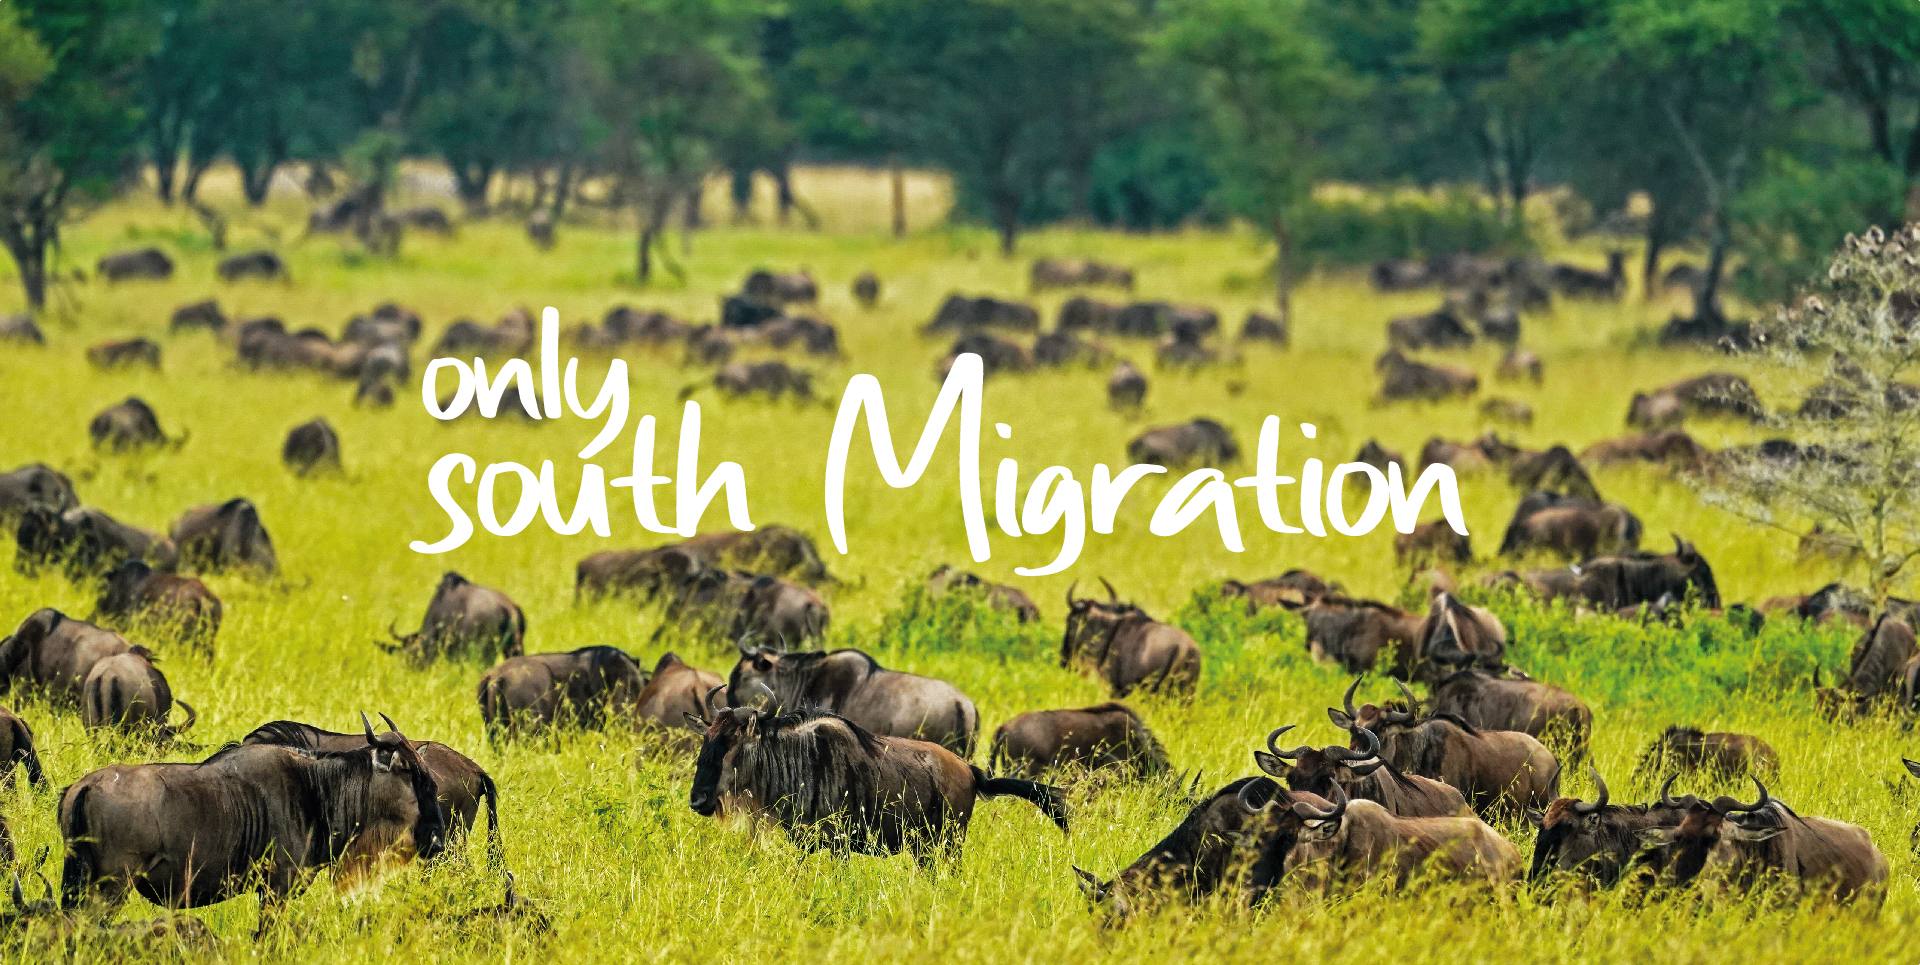 ONLY SOUTH MIGRATION